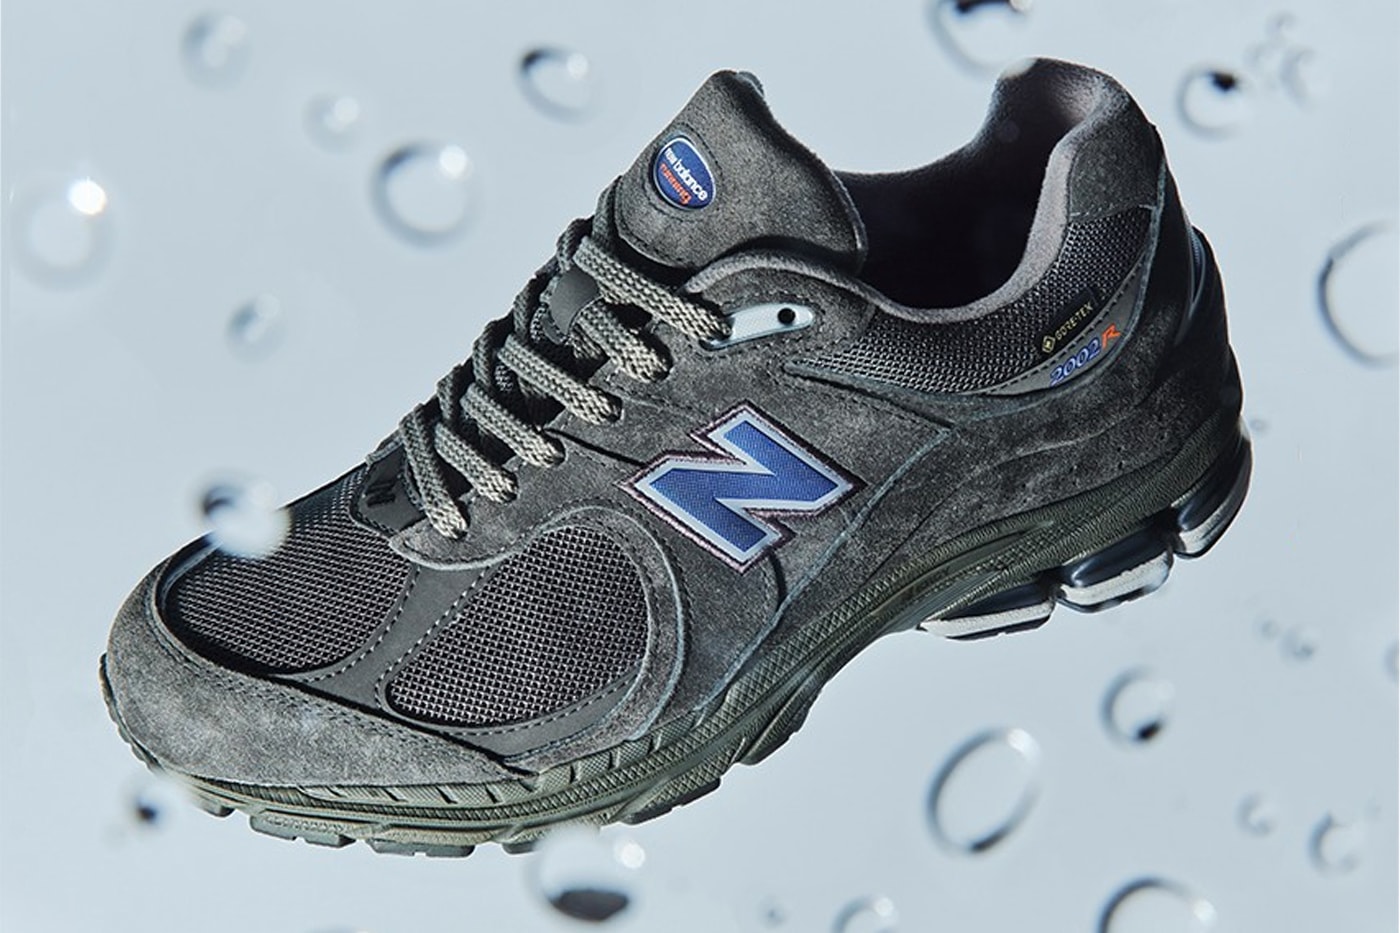 Beams Teams up With New Balance to Release Gore-Tex Featured M2002r New Balance M2002R